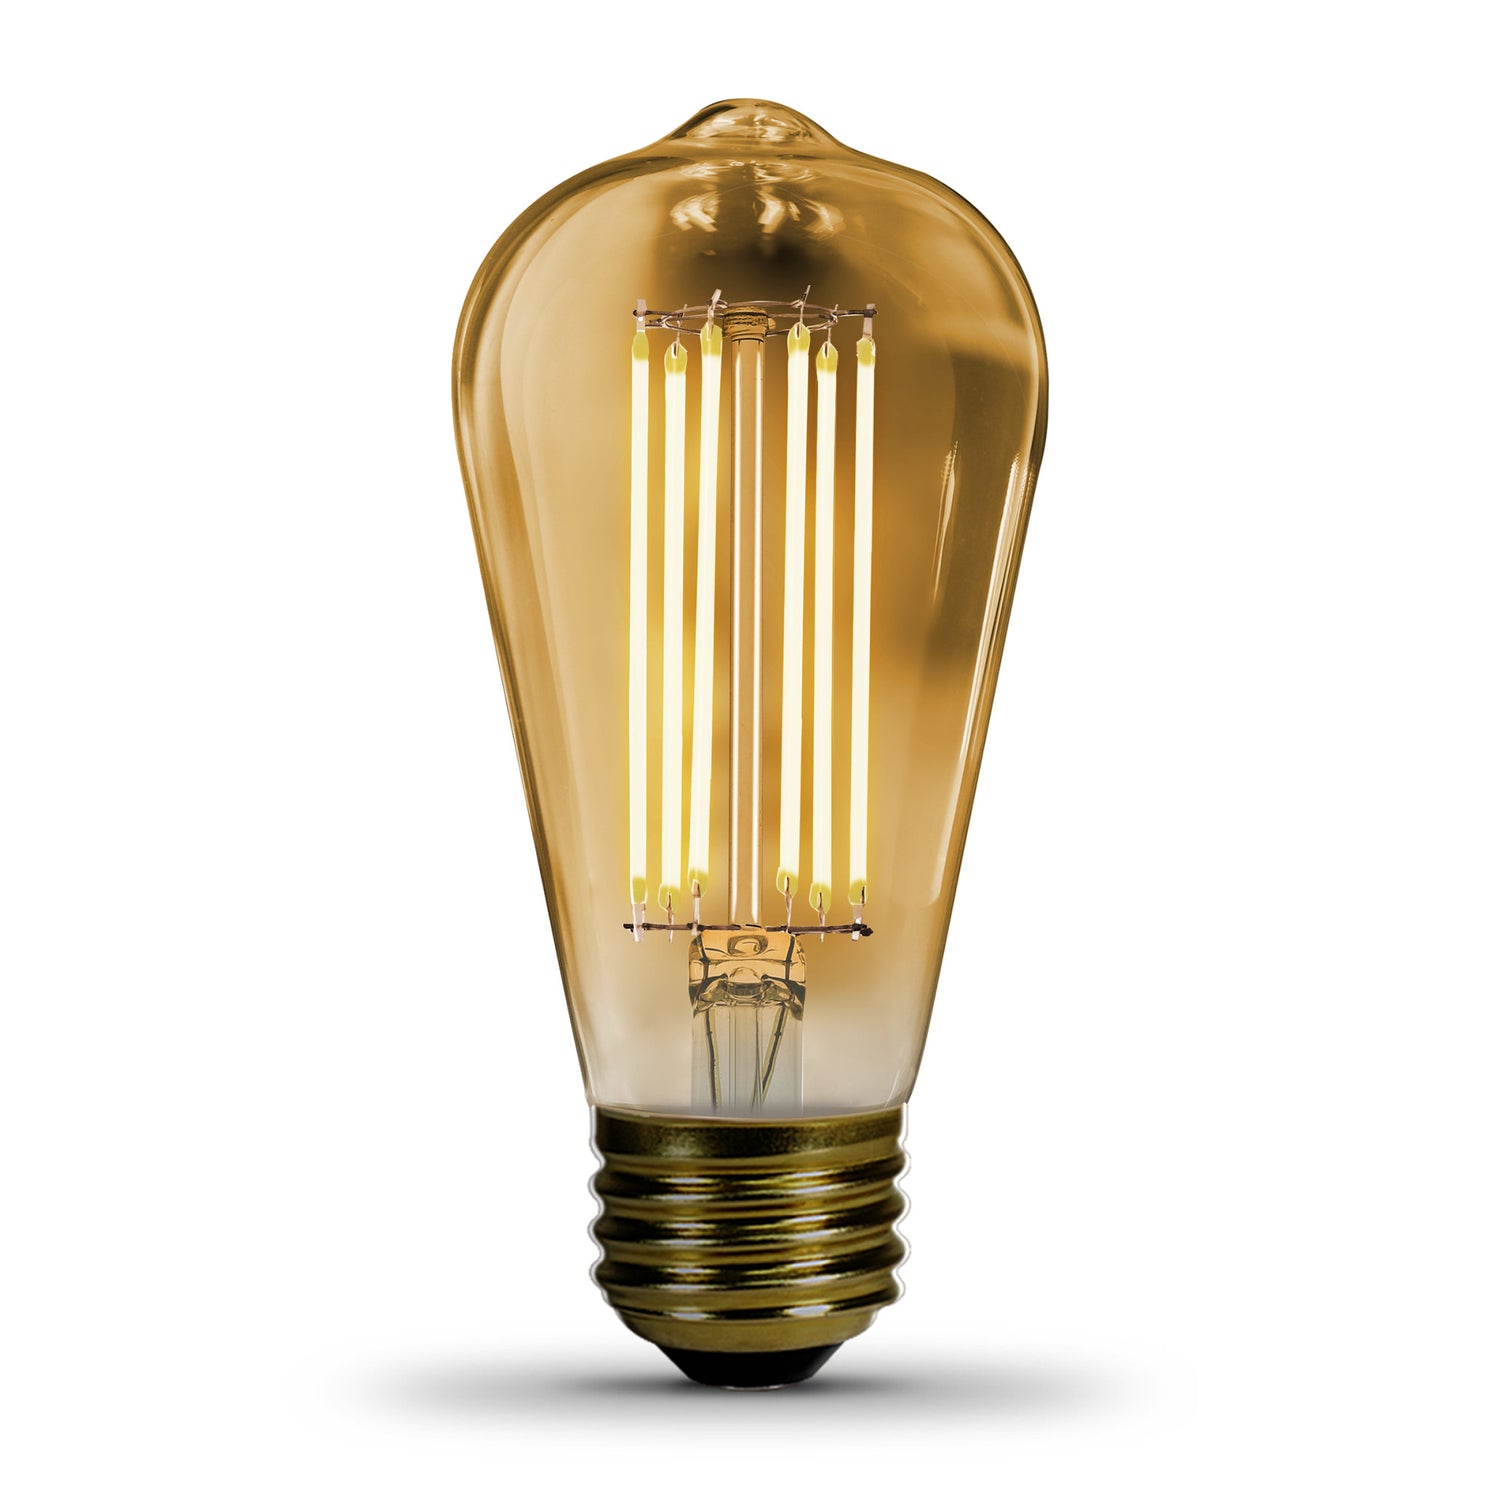 9W (60W Replacement) ST19 E26 Dimmable Straight Filament Amber Glass Vintage Edison LED Light Bulb, Warm Light